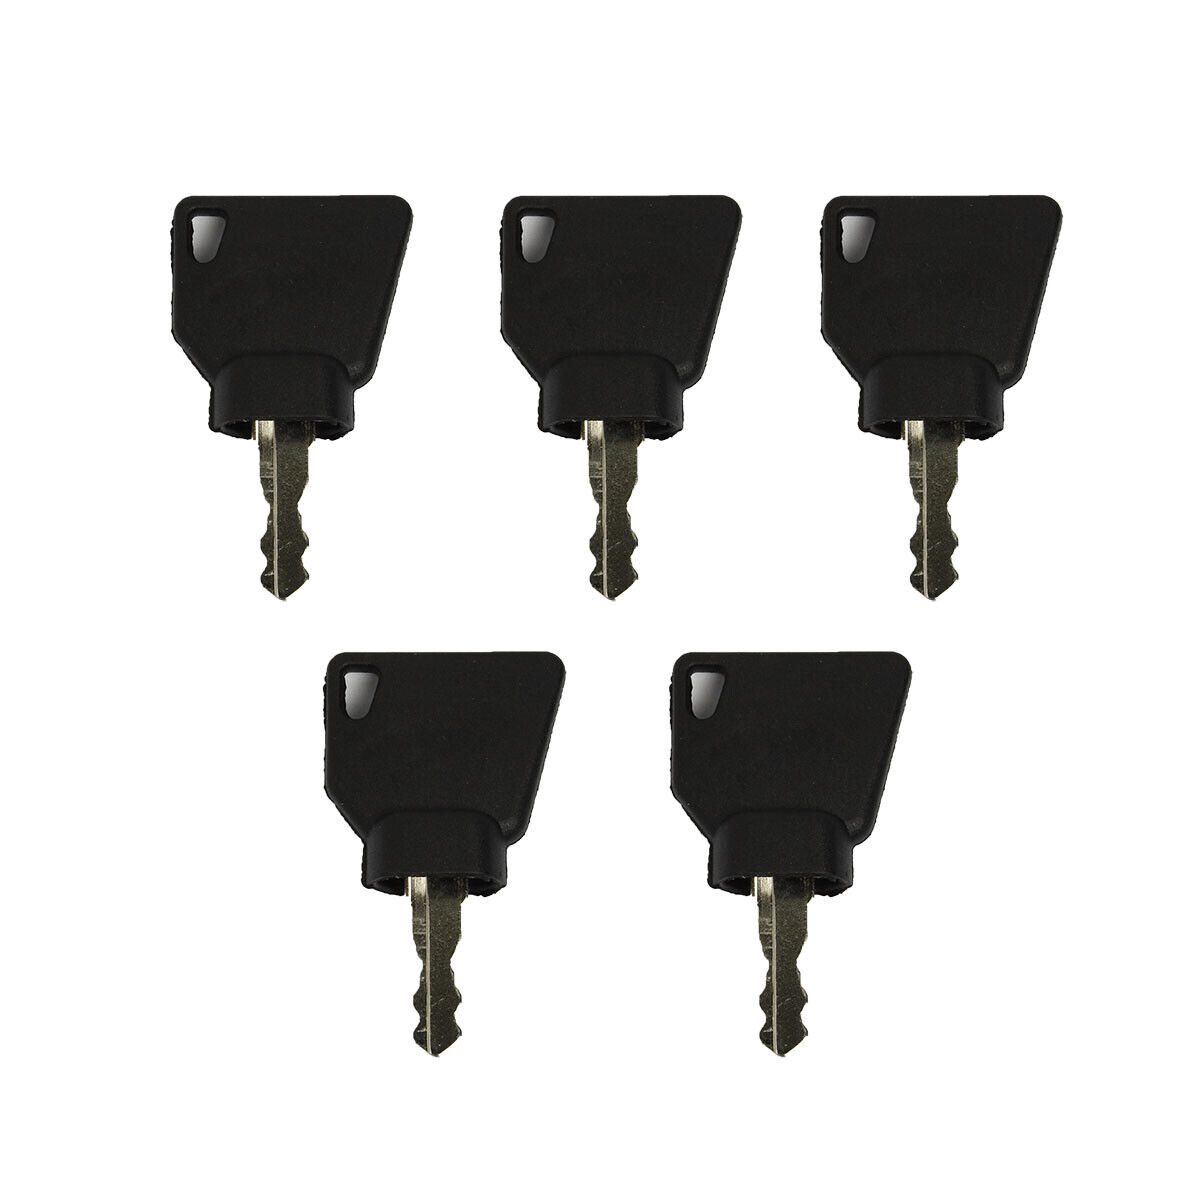 5 PCS Replacement Ignition Keys Fit for JCB Heavy Equipment